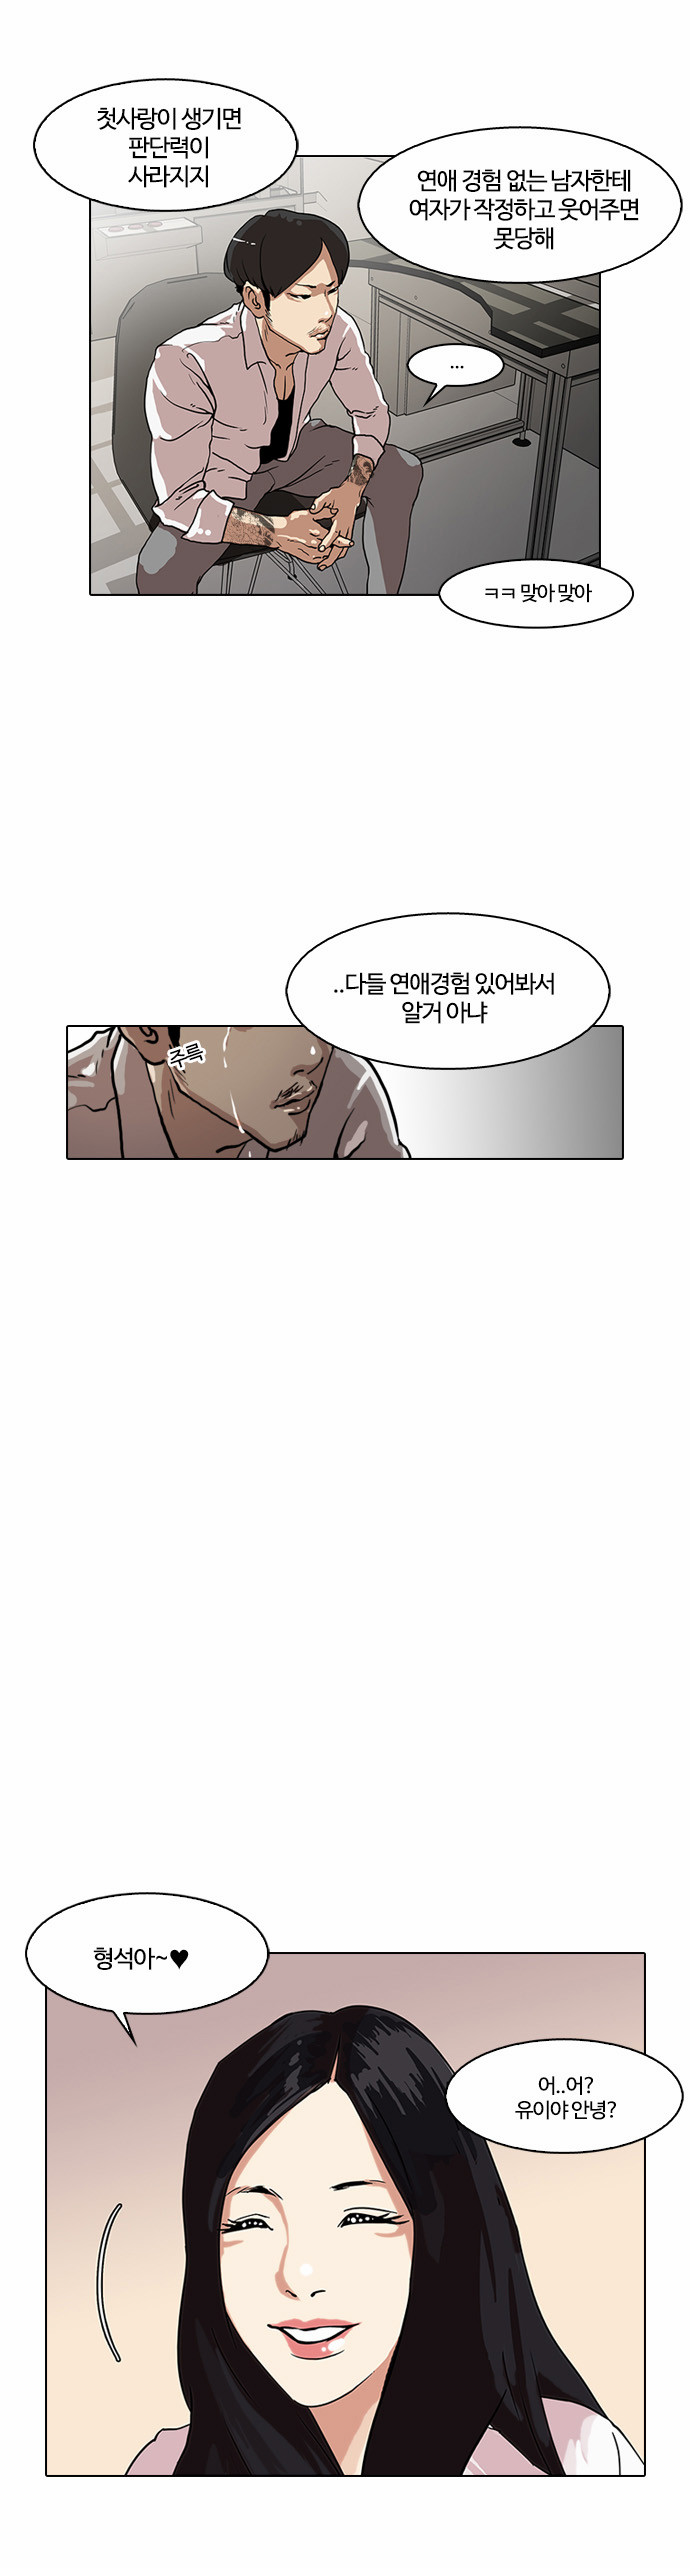 Lookism - Chapter 29 - Page 3